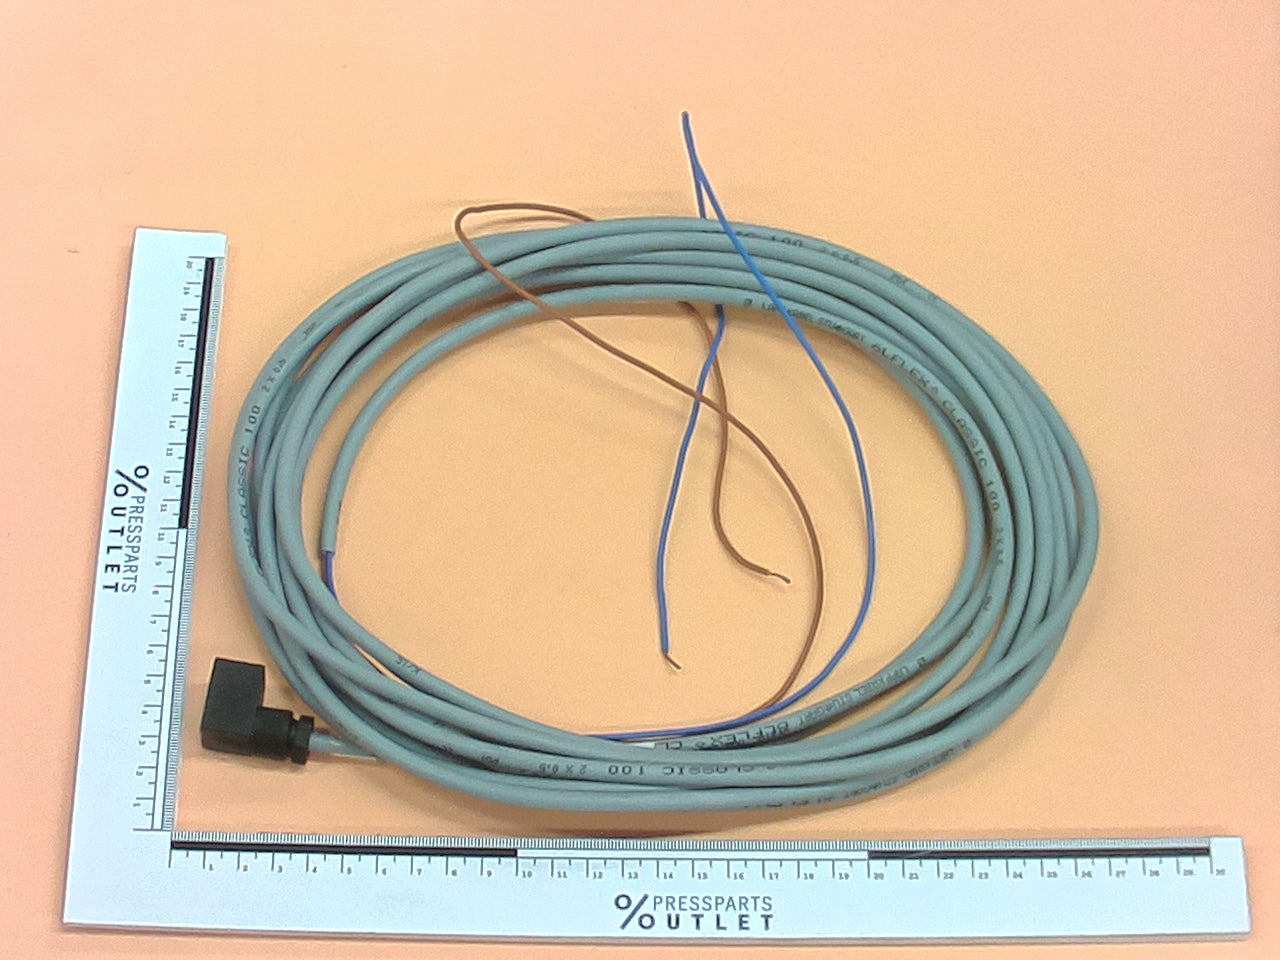 Connecting line xY310       DW - L2.145.1126/01 - Anschlussleitung xY310       DW